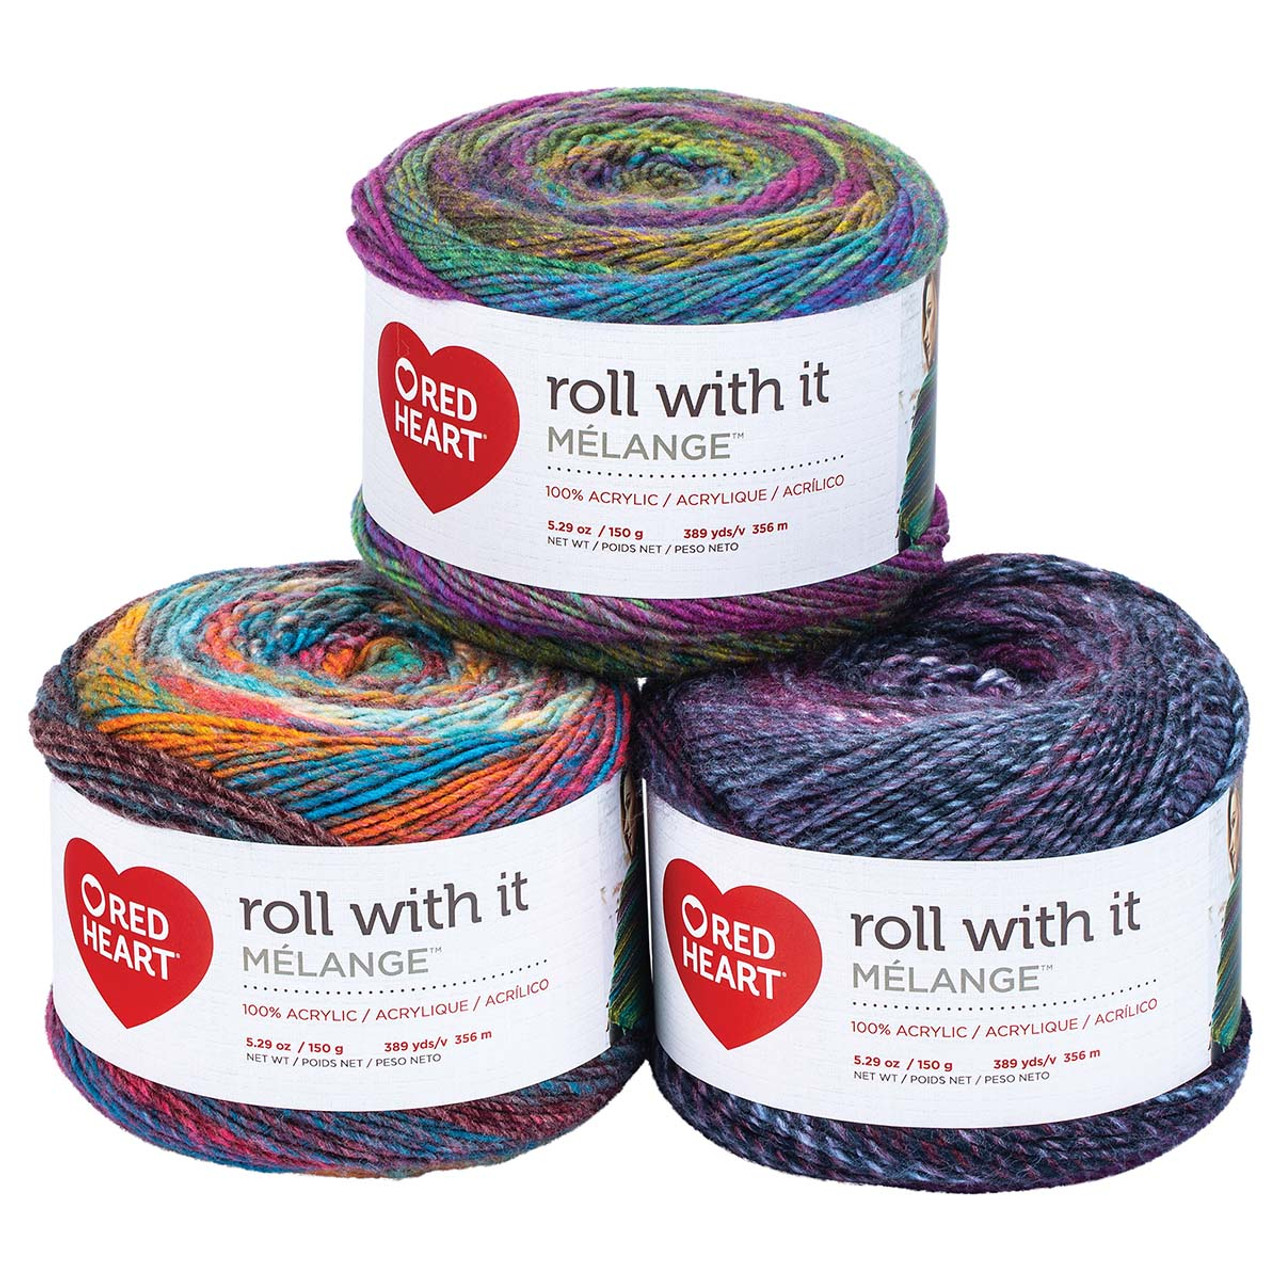 Red Heart Knitting Yarn Roll with It Melange Yarn Hollywood E890-0825 (3-Skeins) Same Dye Lot Worsted Medium #4 Soft 100% Acrylic Bundle with 1